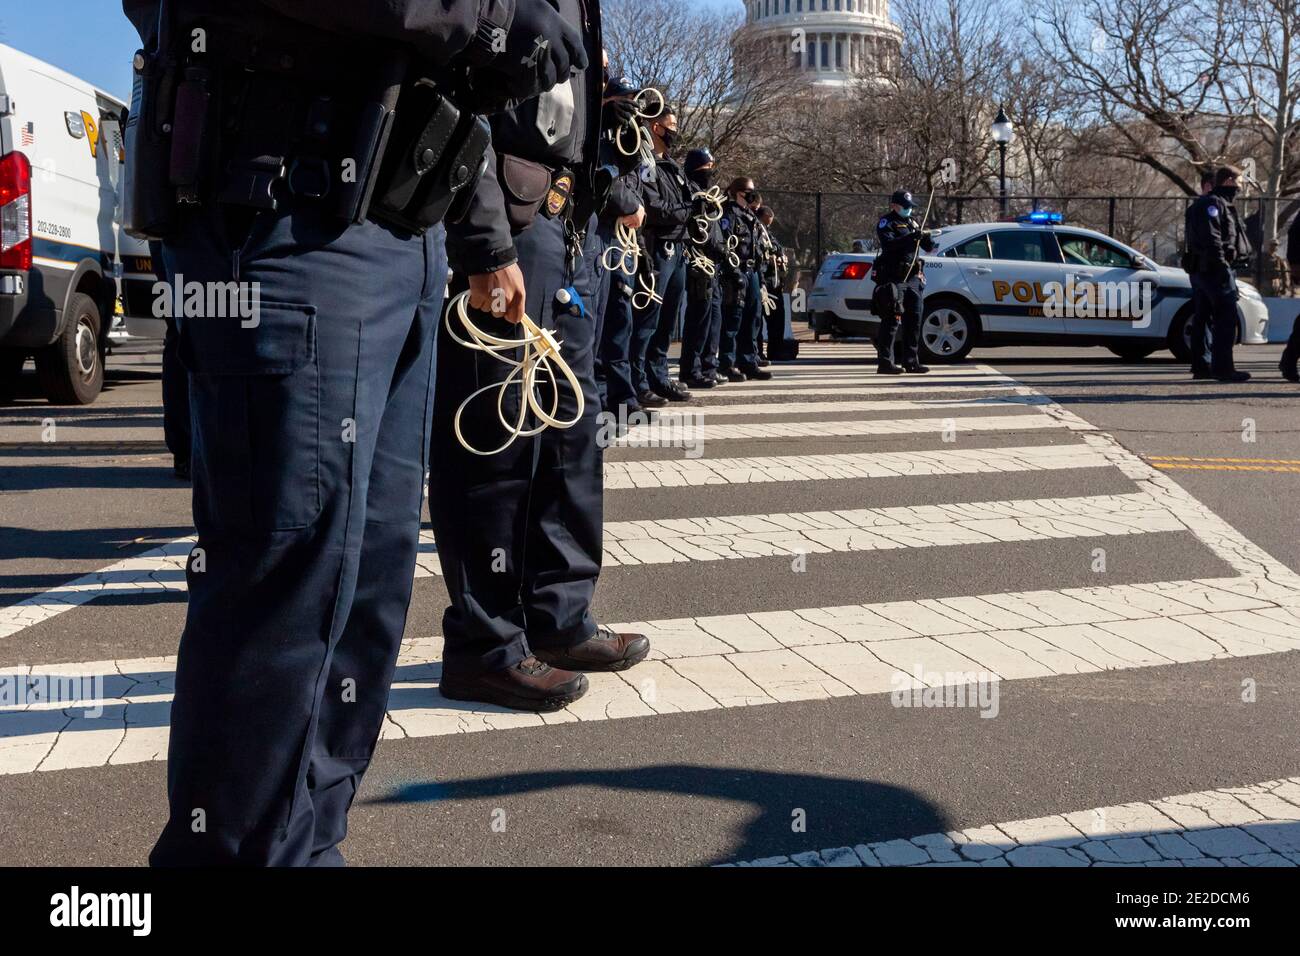 Washington, DC, USA, 13 January, 2021.  Pictured: Capitol Police greeted participants with large numbers of officers and plastic handcuffs at Shutdown DC's Expel All Fascists protest.  This was in stark contrast to the welcome given terrorists and insurrectionists the previous week.  Protesters wrote the names of Representatives and Senators who objected to certification of the presidential election results on January 6 on three large banners.  The banners called expulsion of all fascists from Congress.  Credit: Allison C Bailey/Alamy Live News Stock Photo